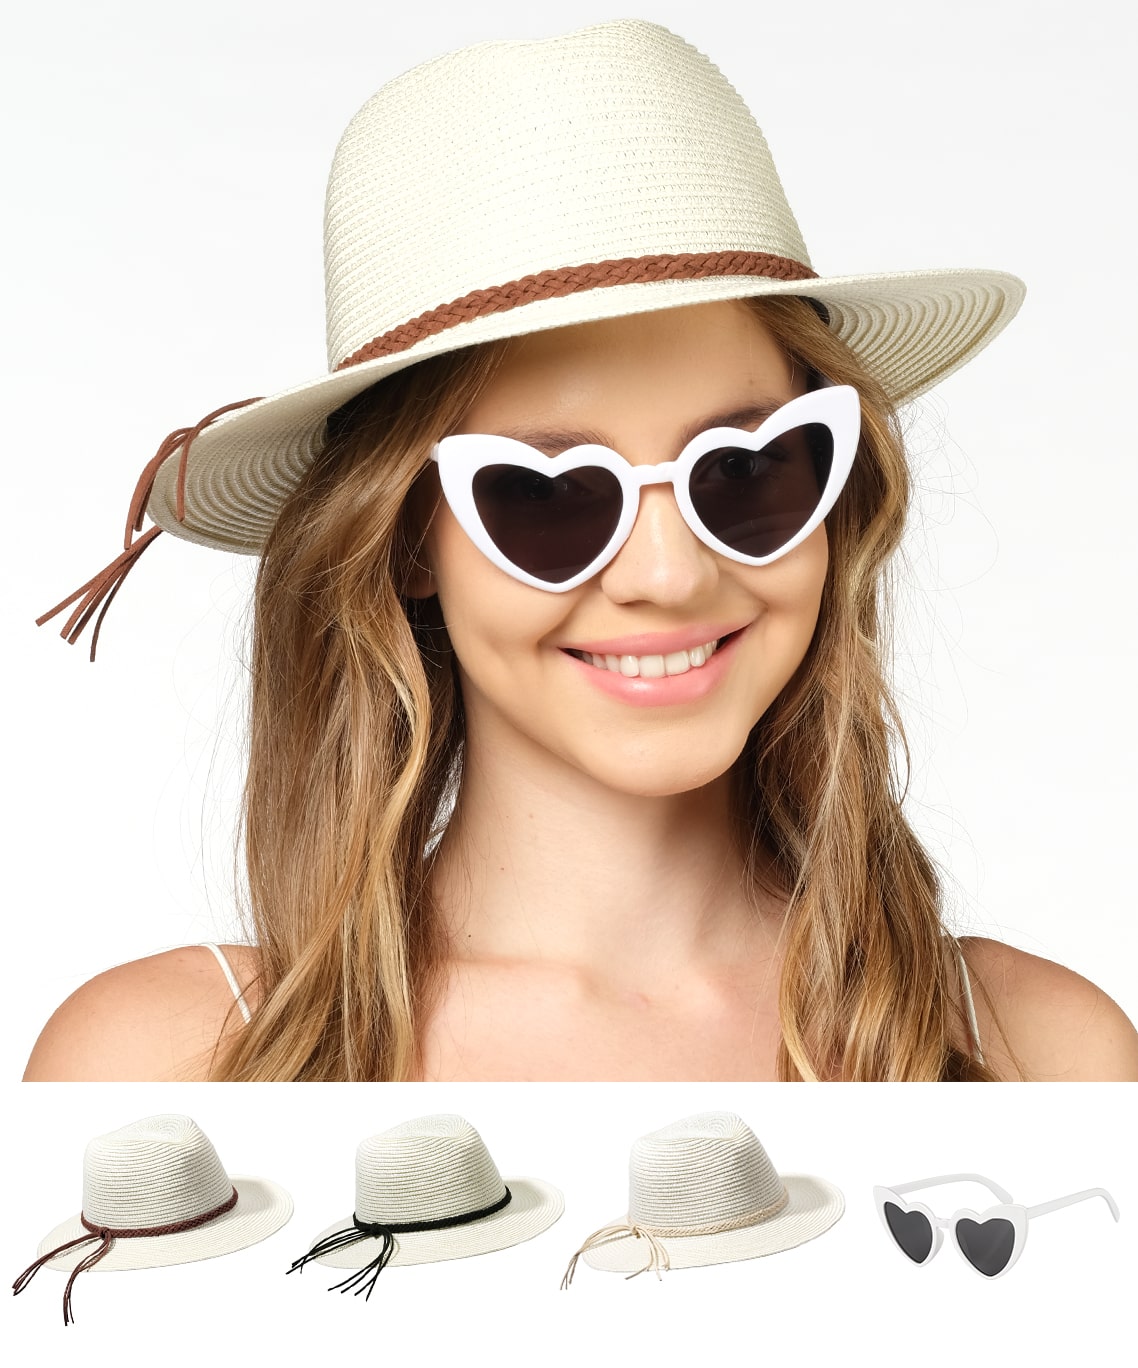 Funcredible Straw Fedora Hat for Women - Panama Hat with Bows and Heart Shape Glasses - Foldable Sun Hat - Packable Beach Hat